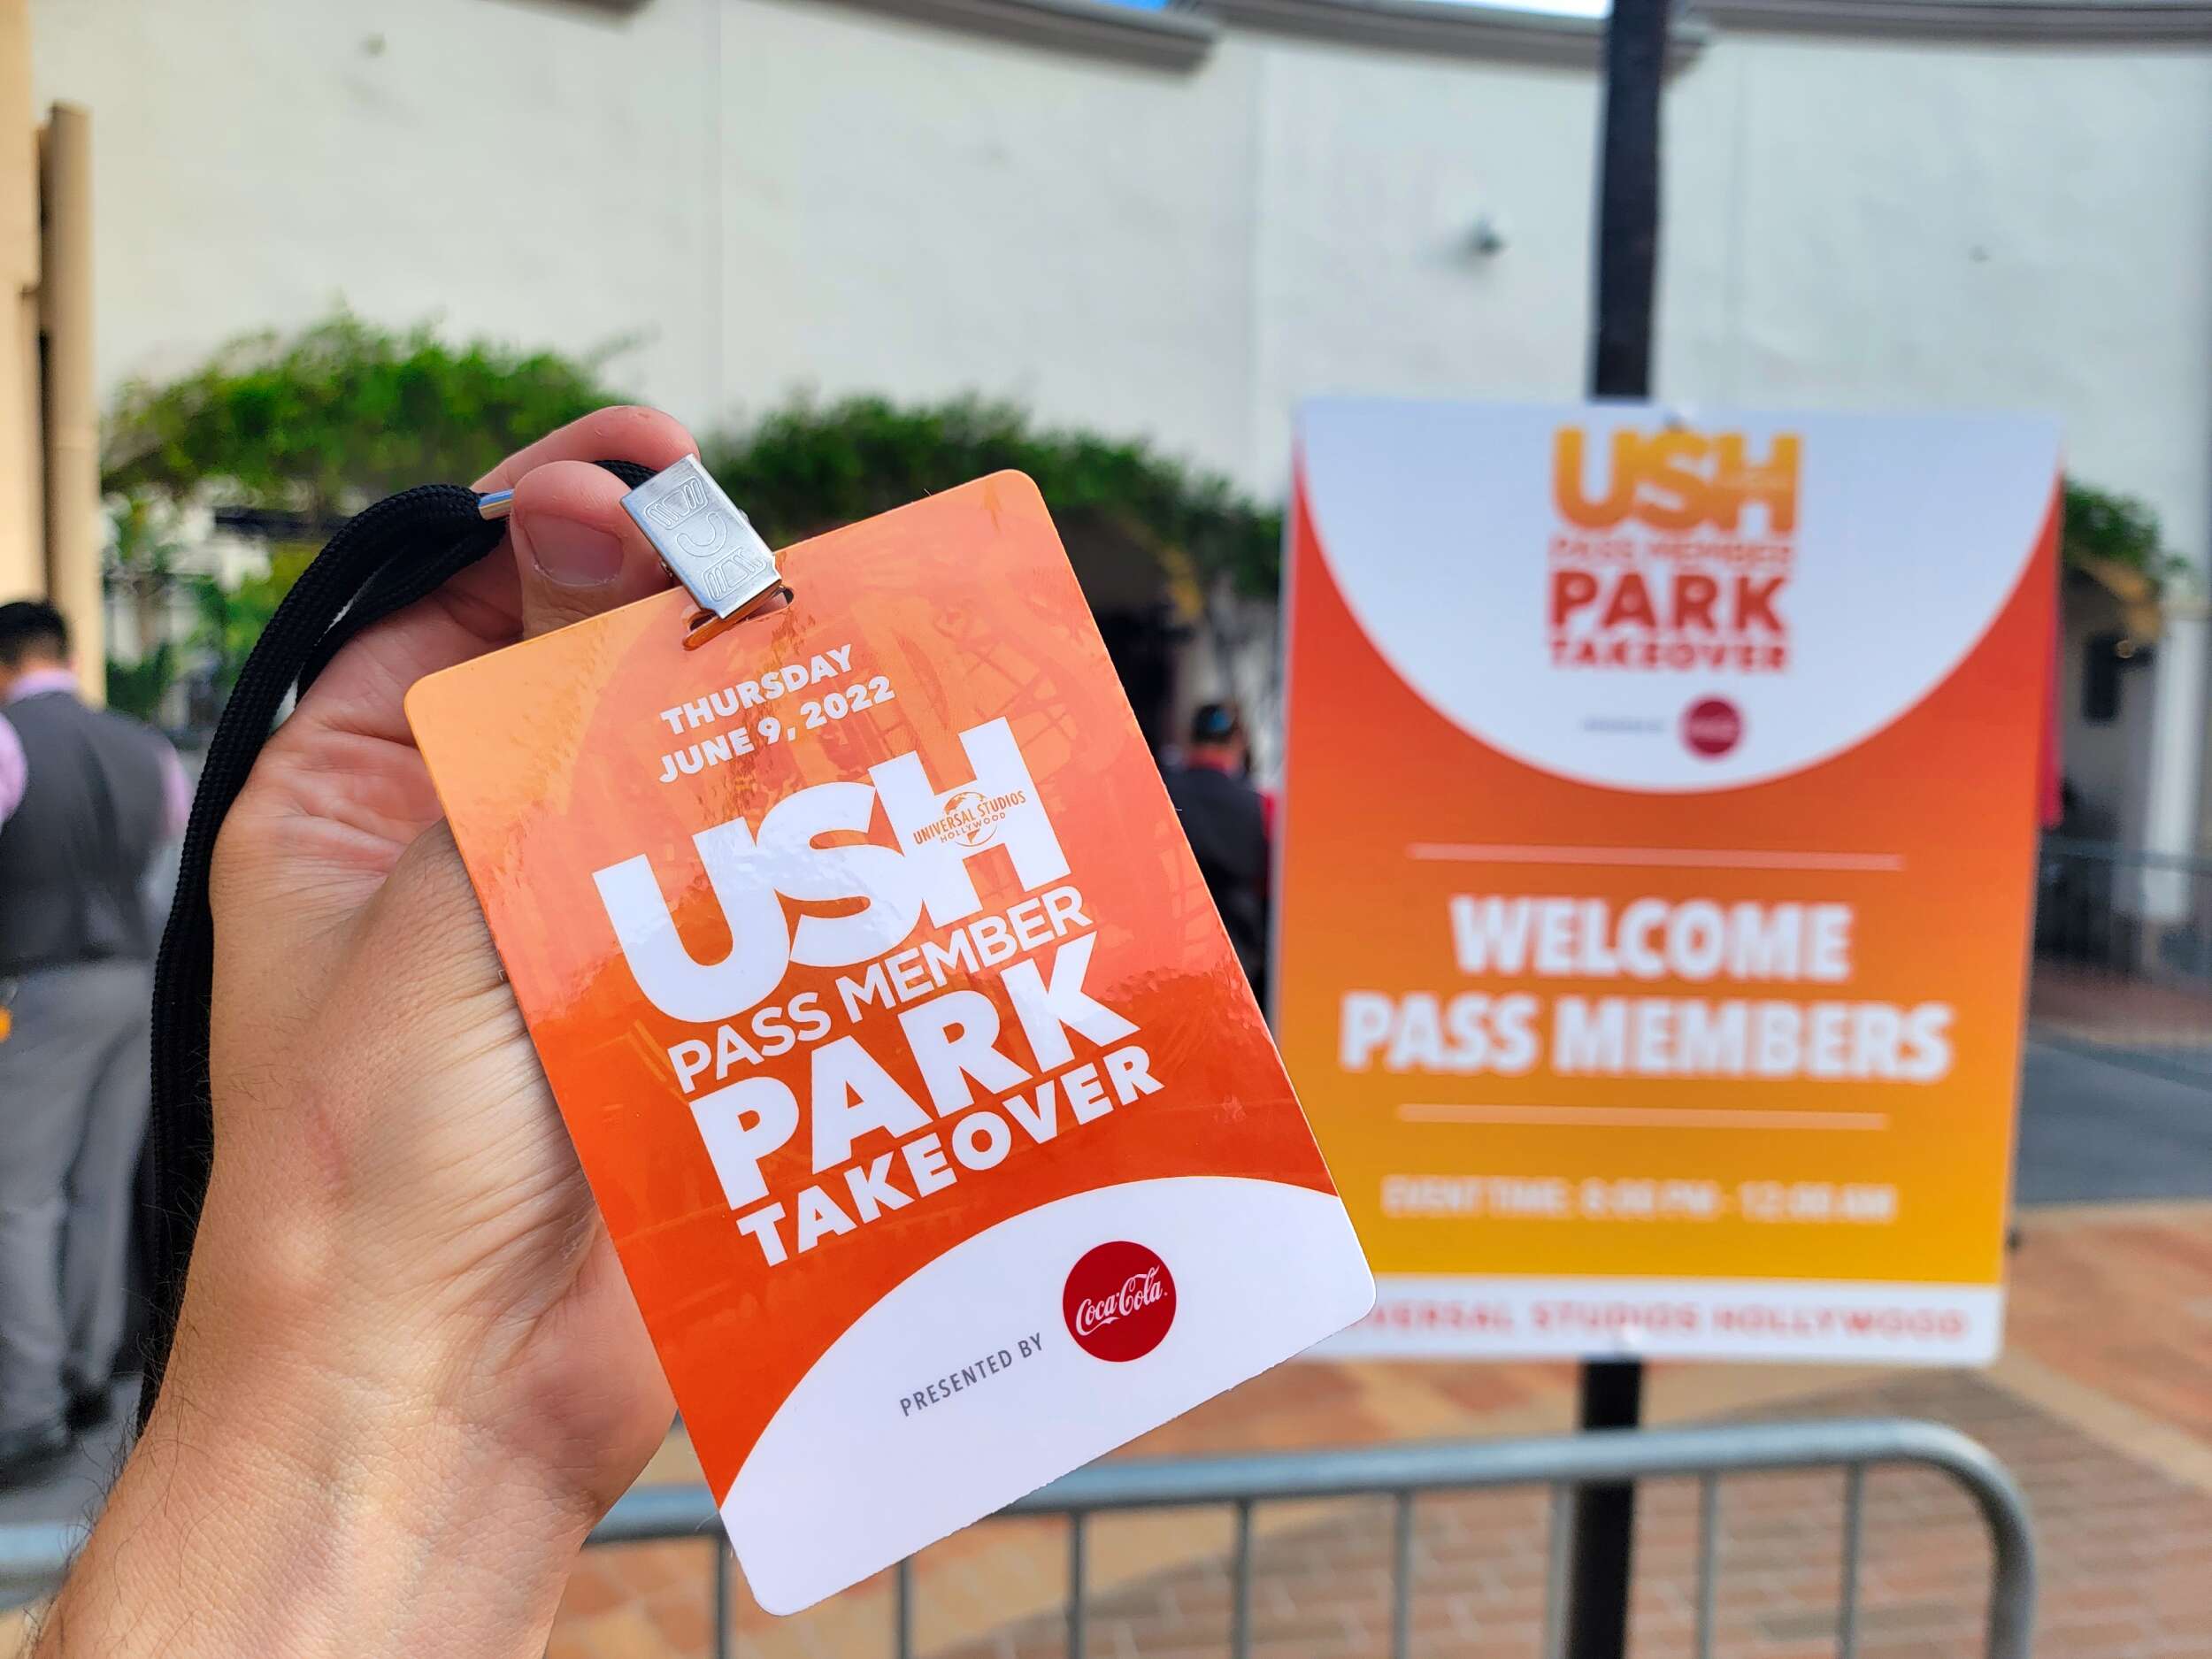 USH Pass Member Park Takeover Night sign and badge